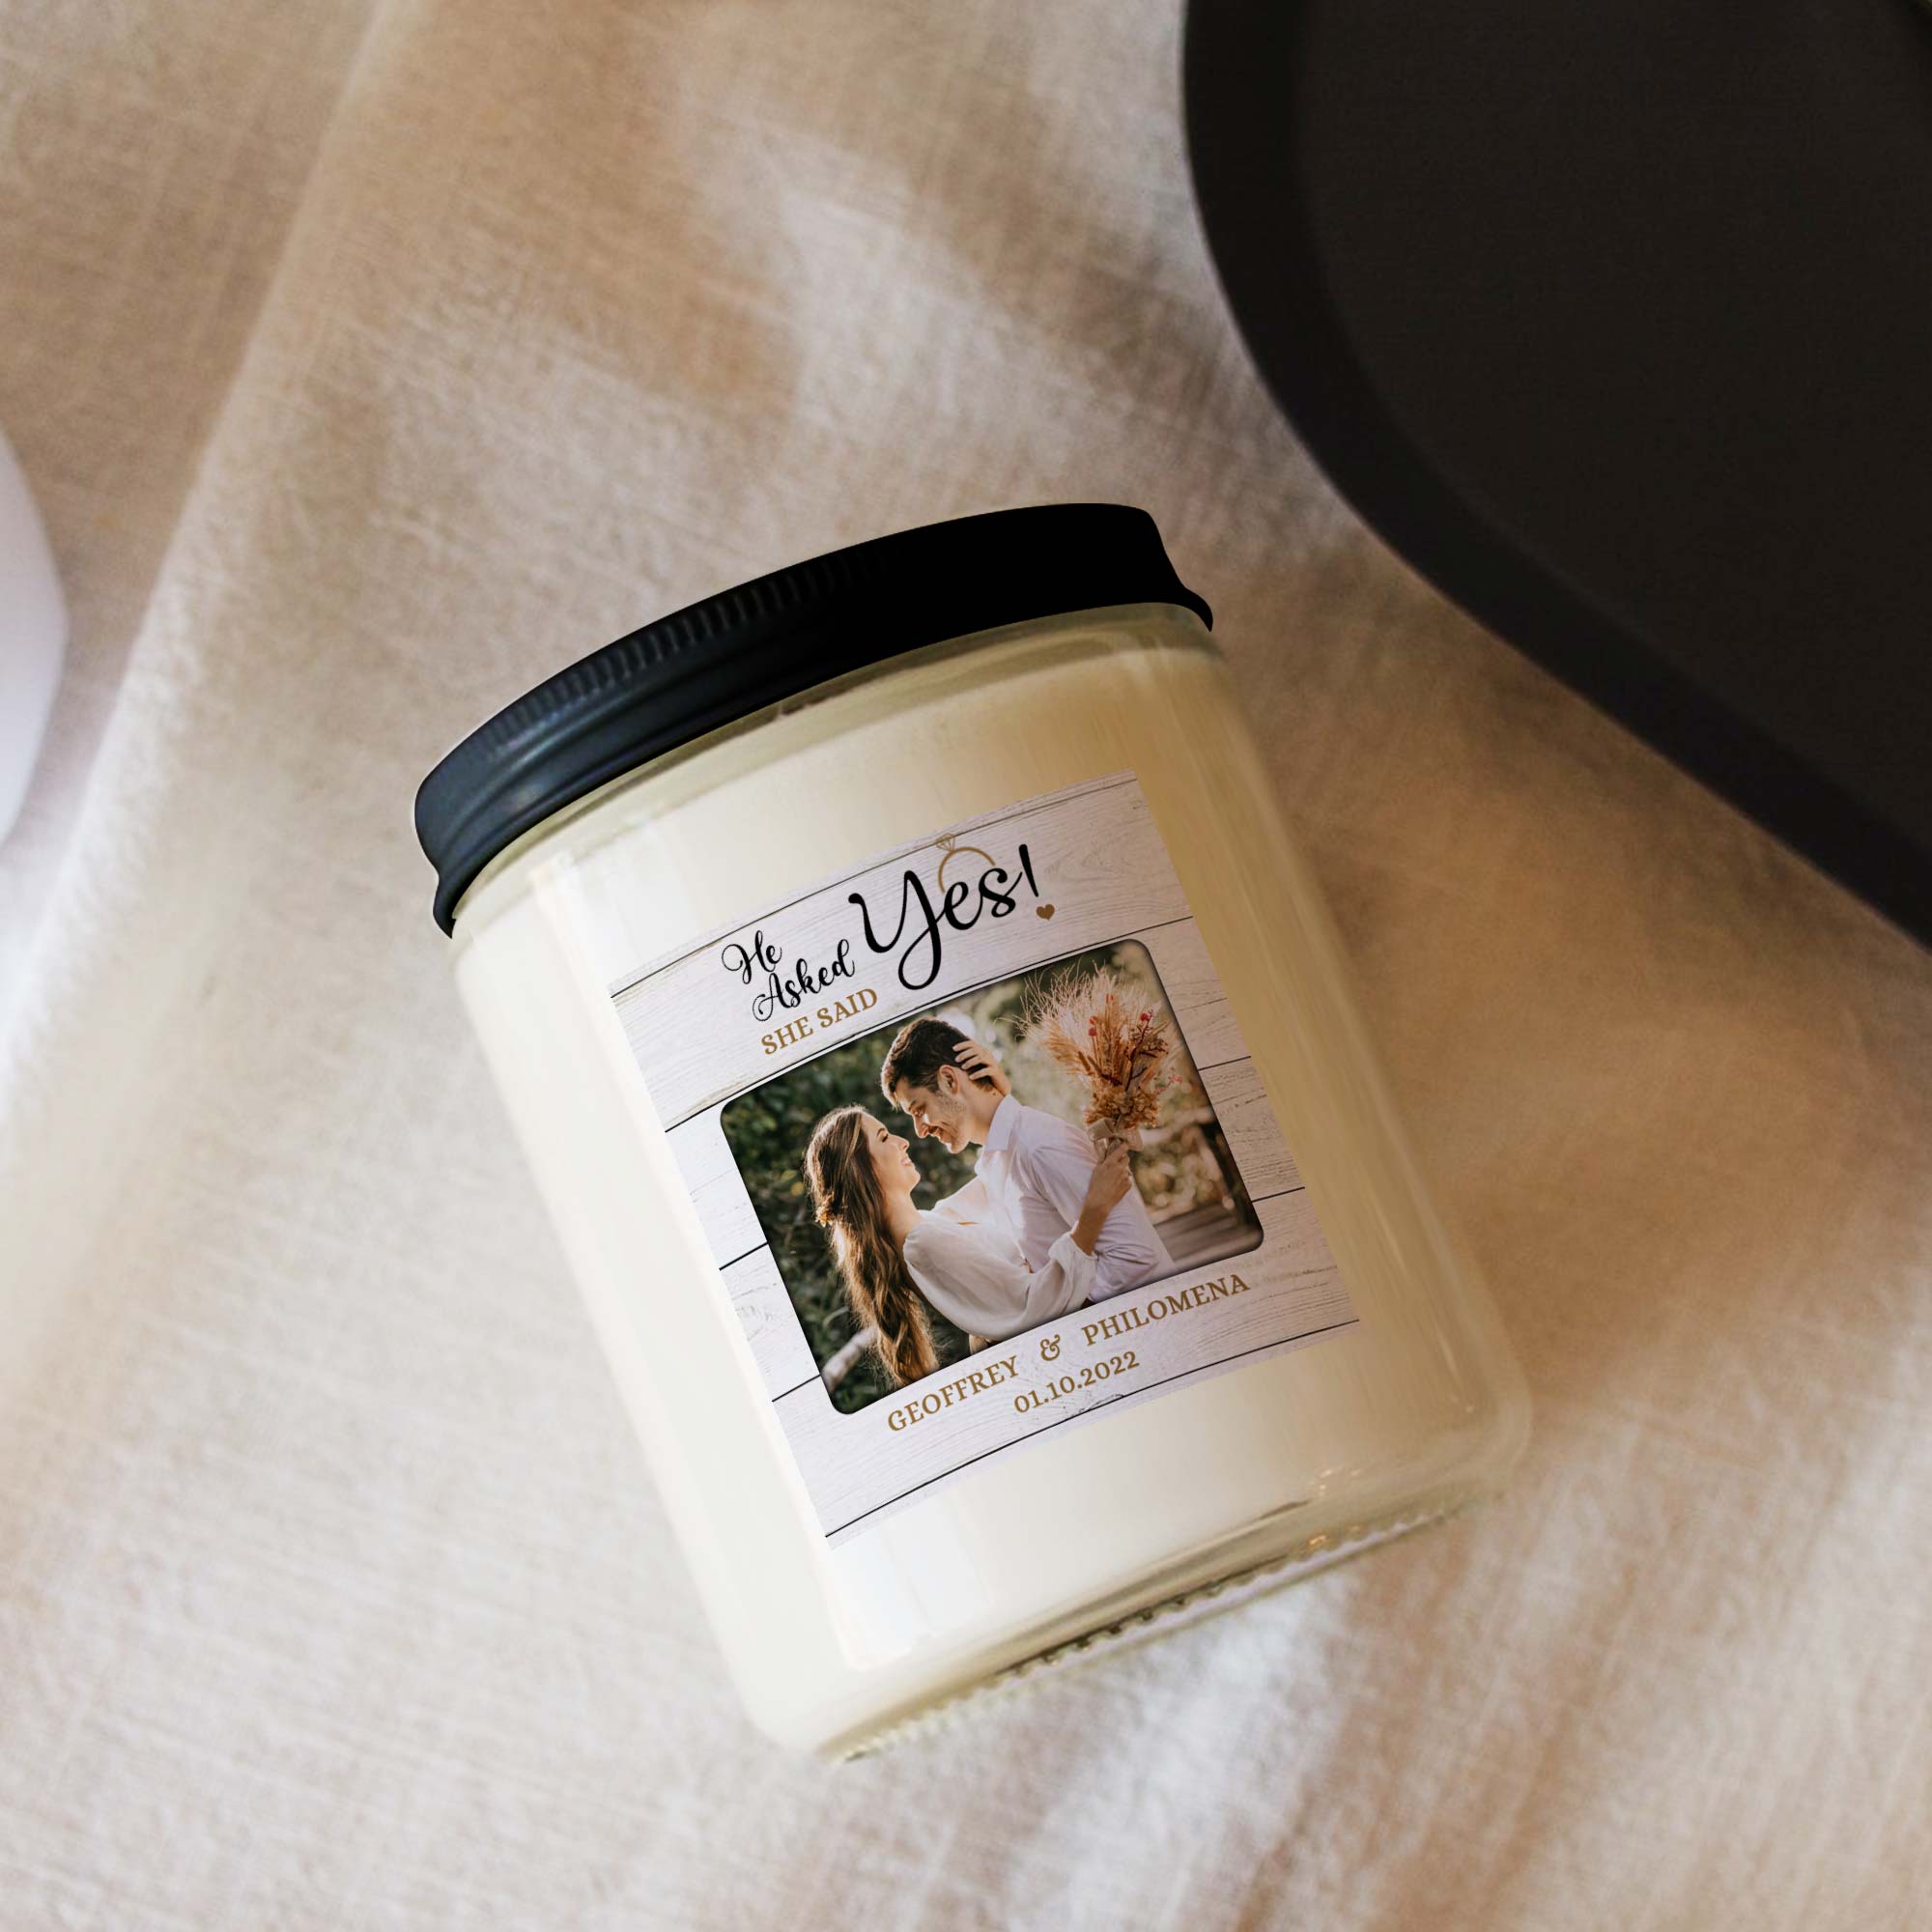 Engagement Candle Gifts for Wife, Mr and Mrs Photo Candle, Personalized Engagement Candle Gift For Bride